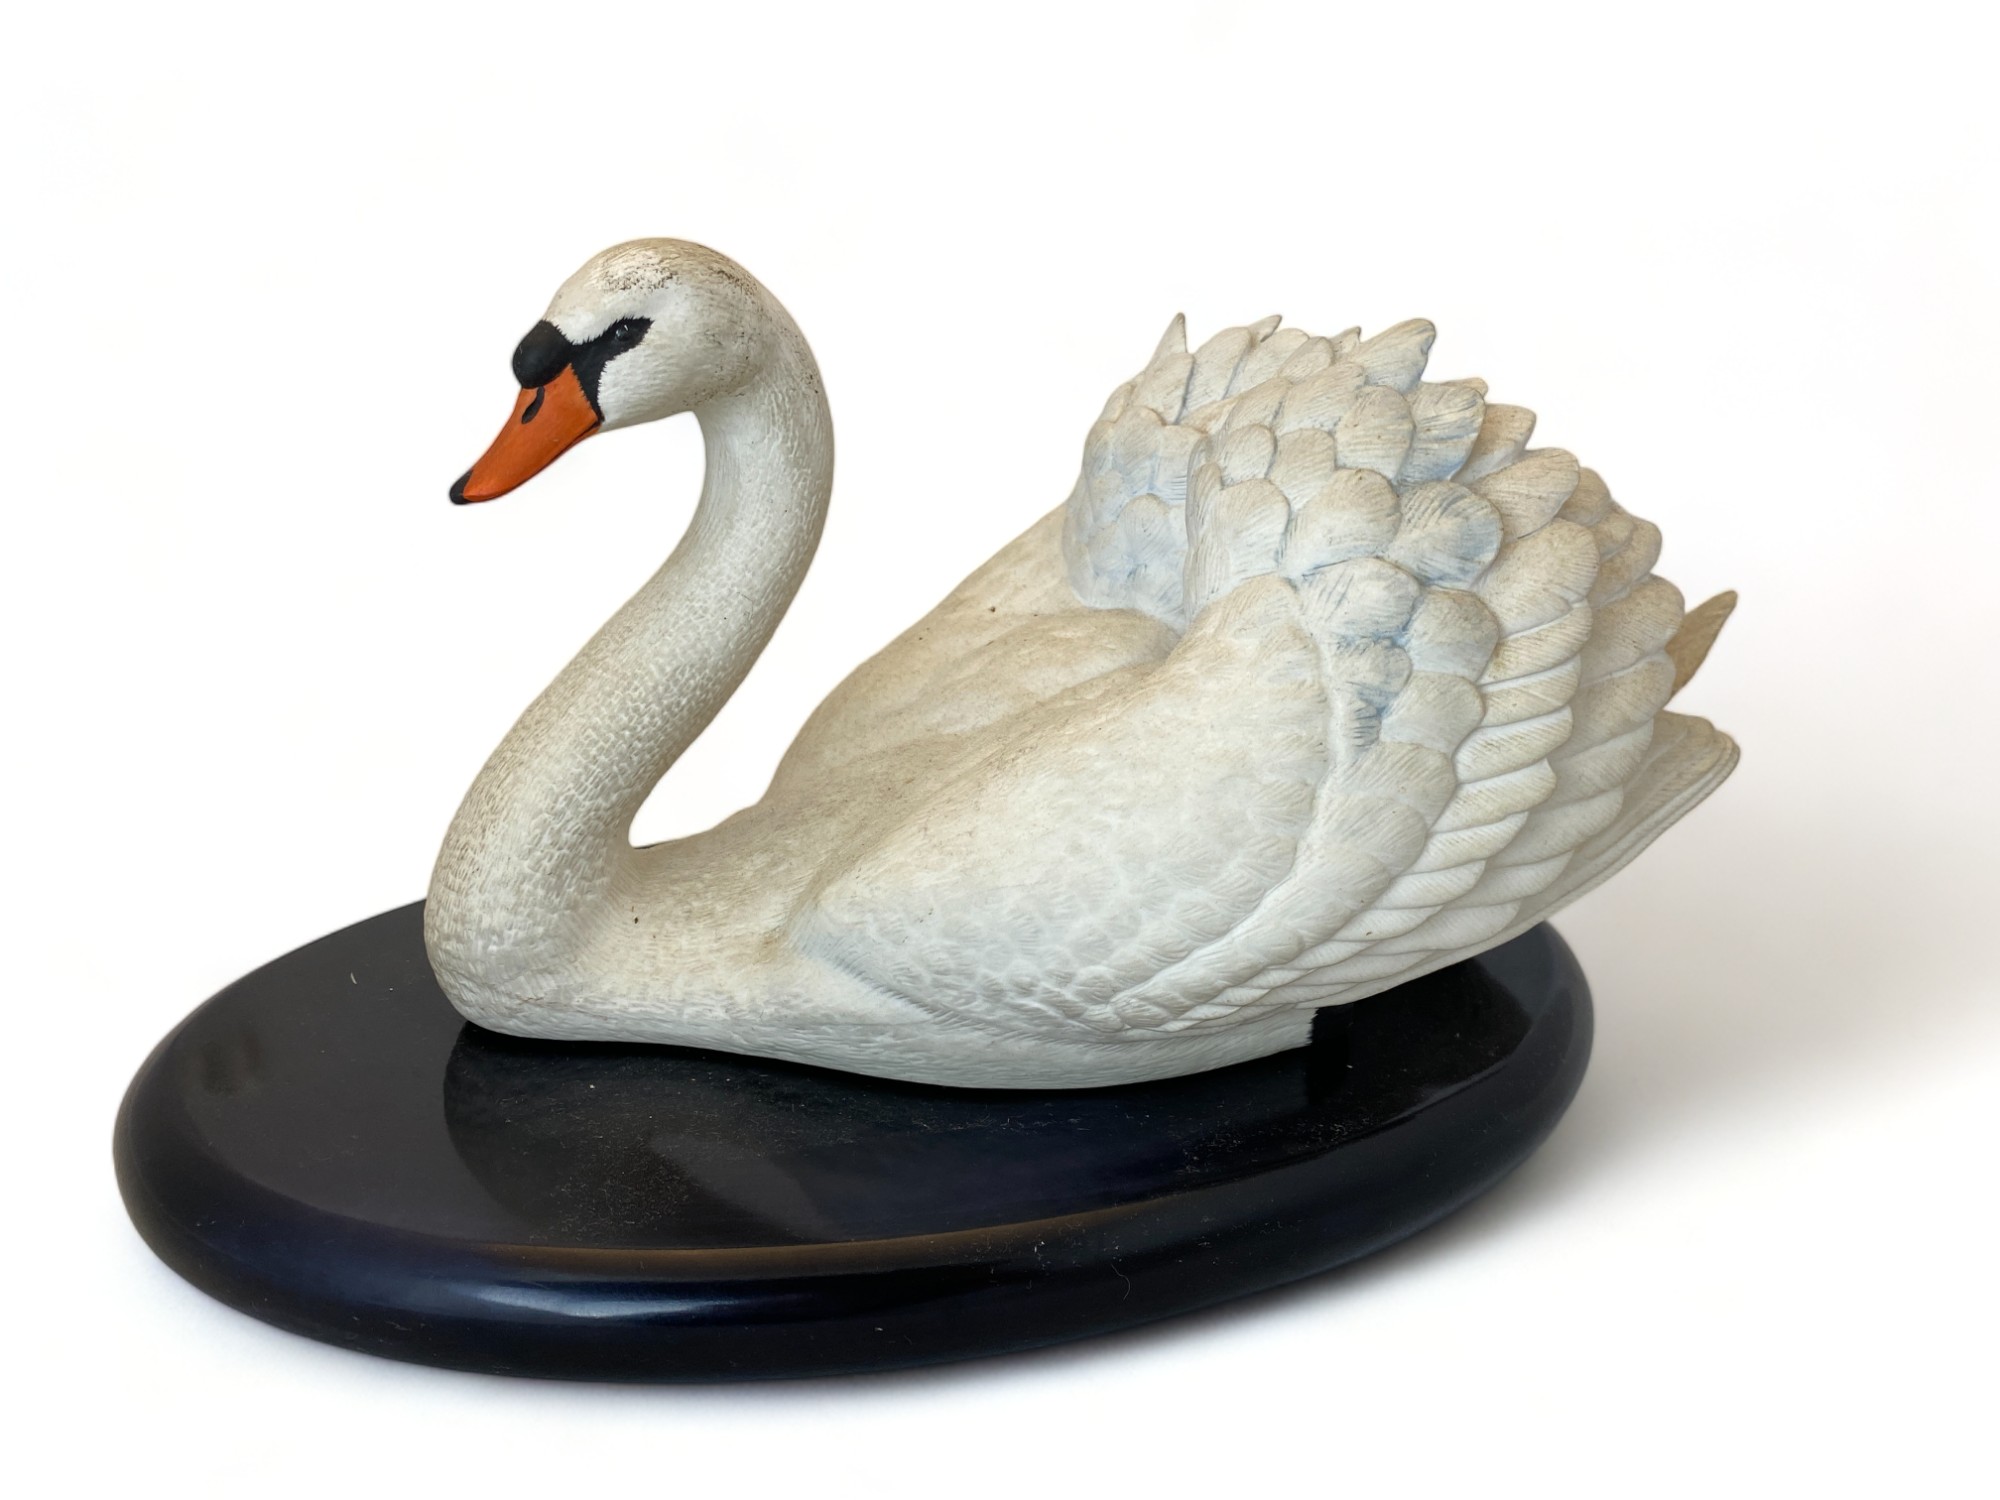 A Royal Doulton porcelain figure, 'The Boy Evacuee' and a Franklin Mint bisque porcelain 'Royal Swan - Image 7 of 13